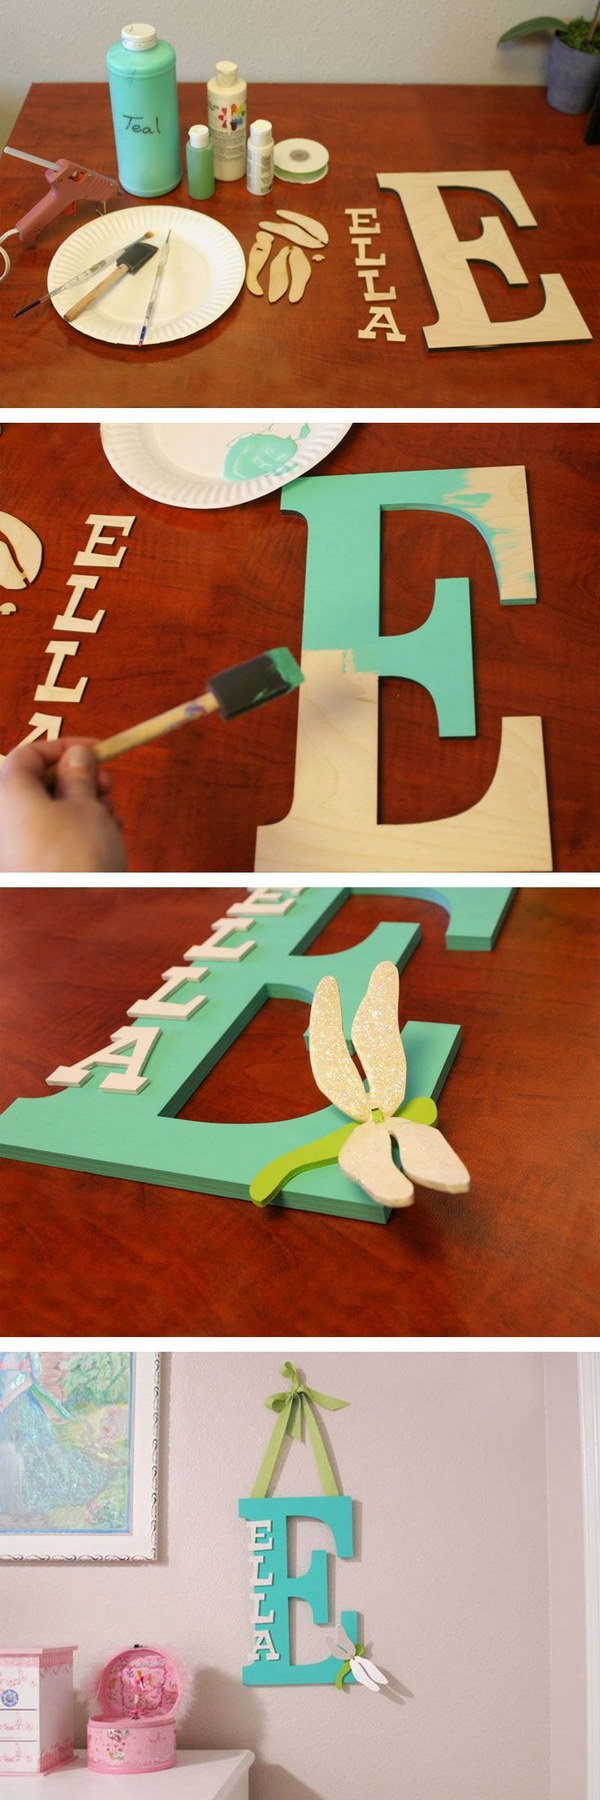 Painted Wooden Letter. This painted wooden letter is super easy to make and looks perfect when haning in kid